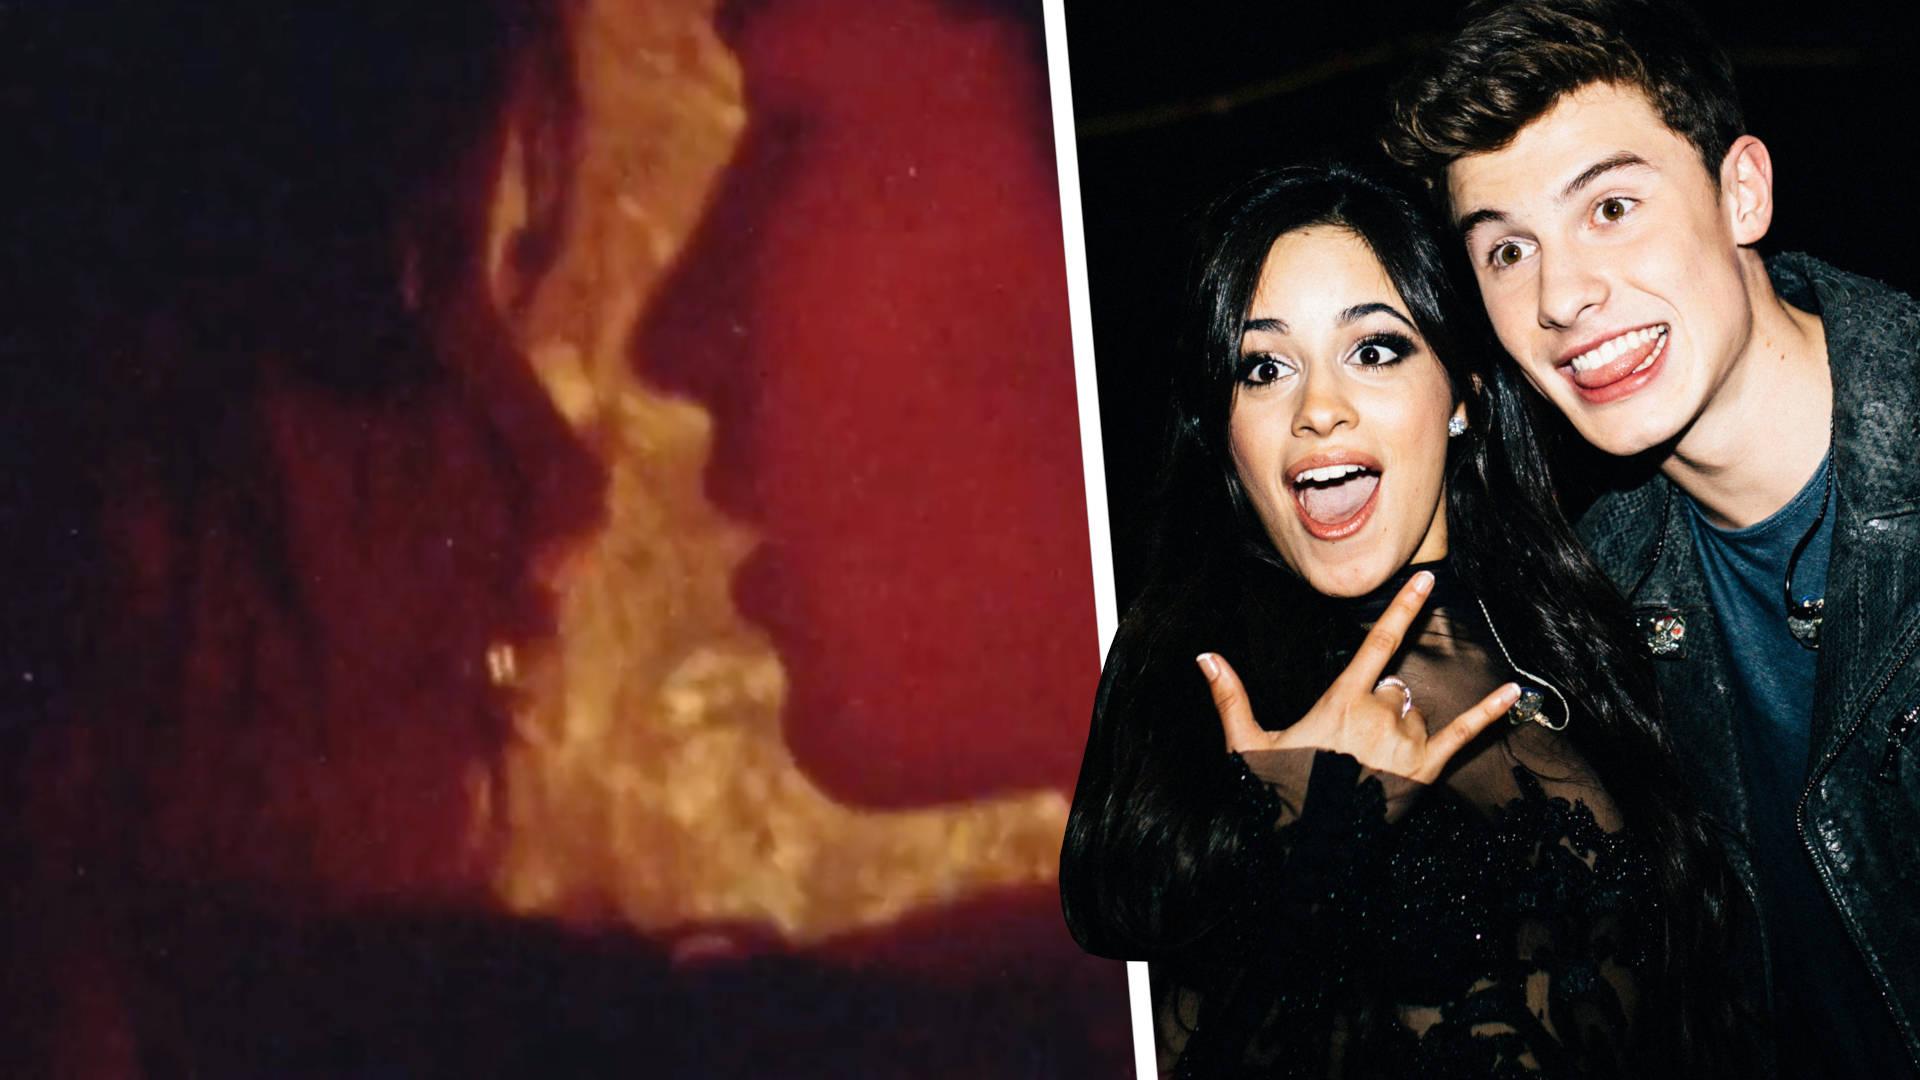 Shawn Mendes makes out with Camila Cabello in 'Señorita' music video